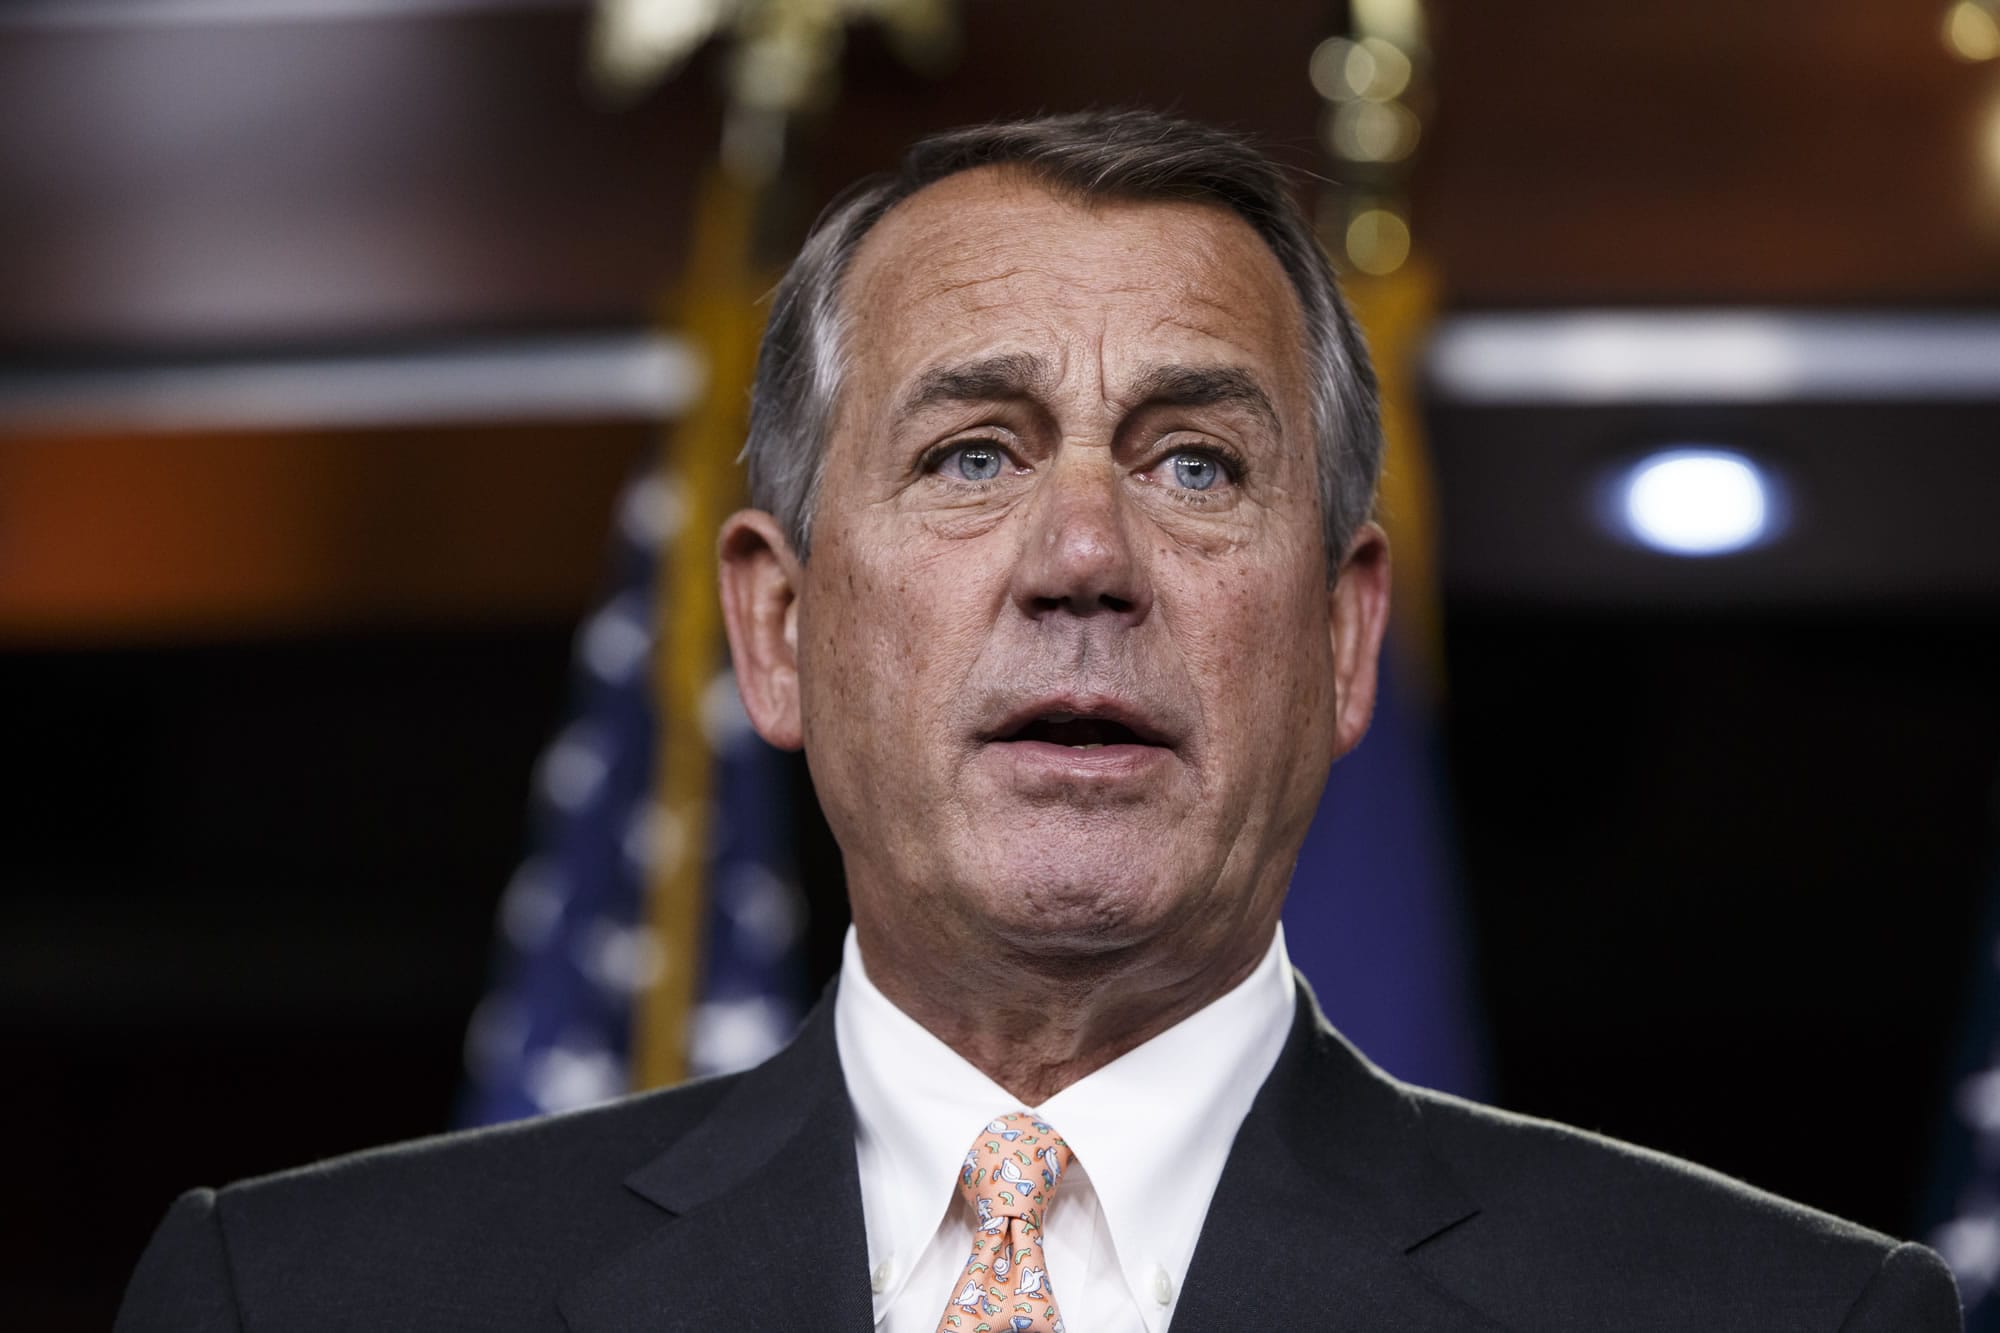 In this photo taken Feb. 26, 2015, then House Speaker John Boehner speaks on Capitol Hill in Washington. Boehner says that aside from international affairs and foreign policy, President Donald Trump’s time in office has been a “complete disaster.”  (AP Photo/J.